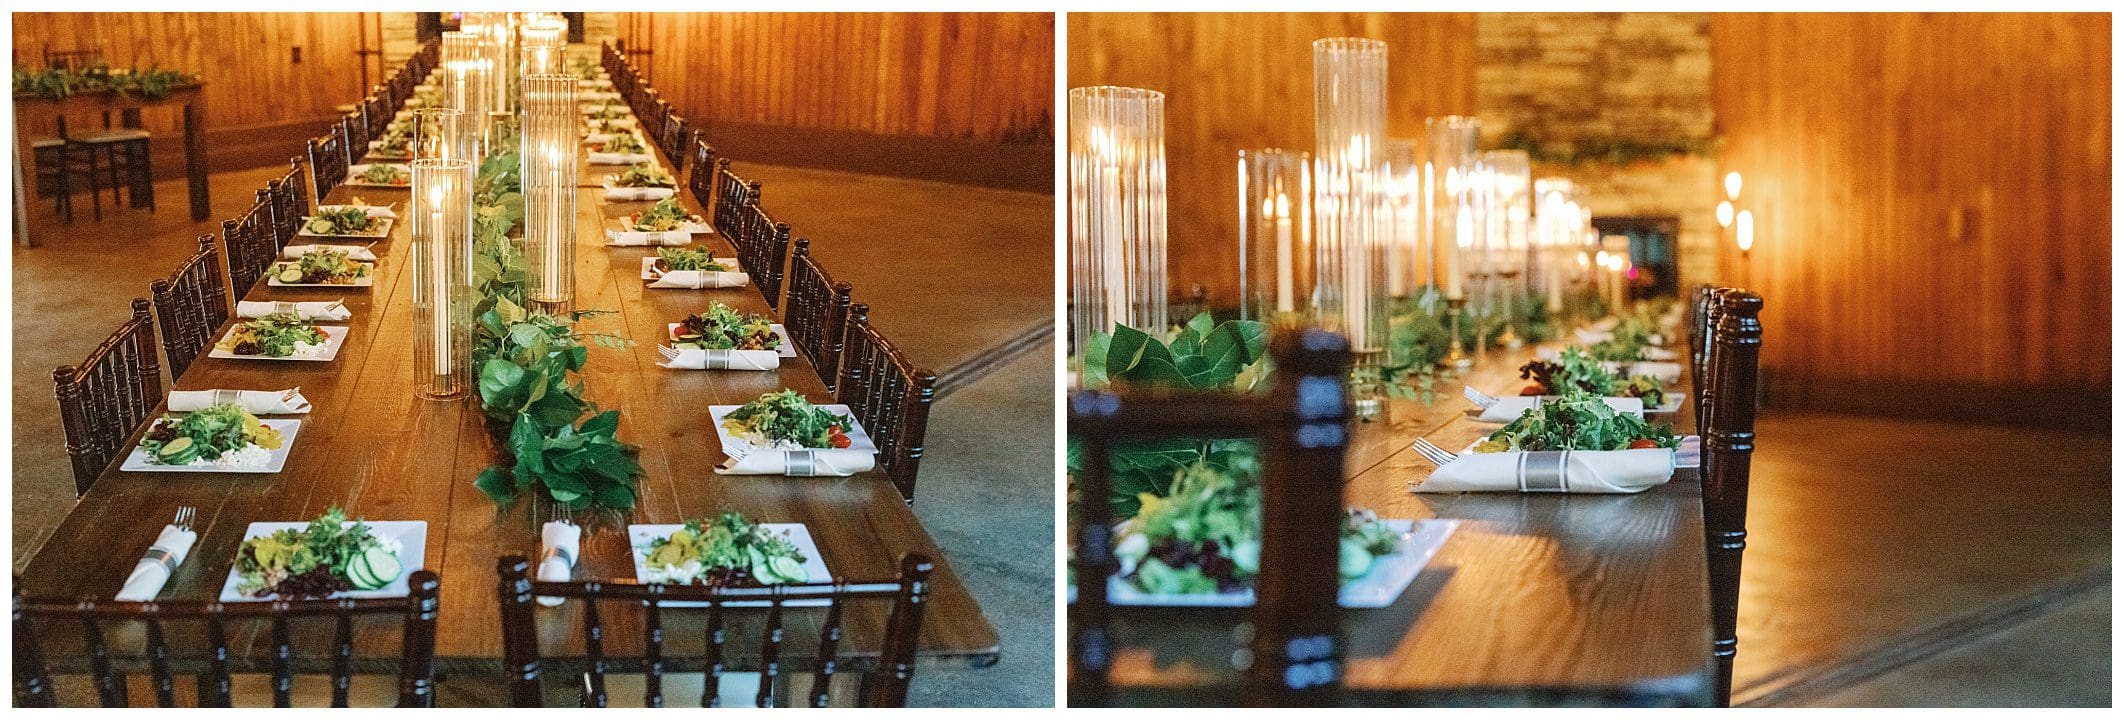 Long dining tables elegantly set with white dishes and greenery in a warmly lit wooden banquet hall, focus on candlelit ambiance.